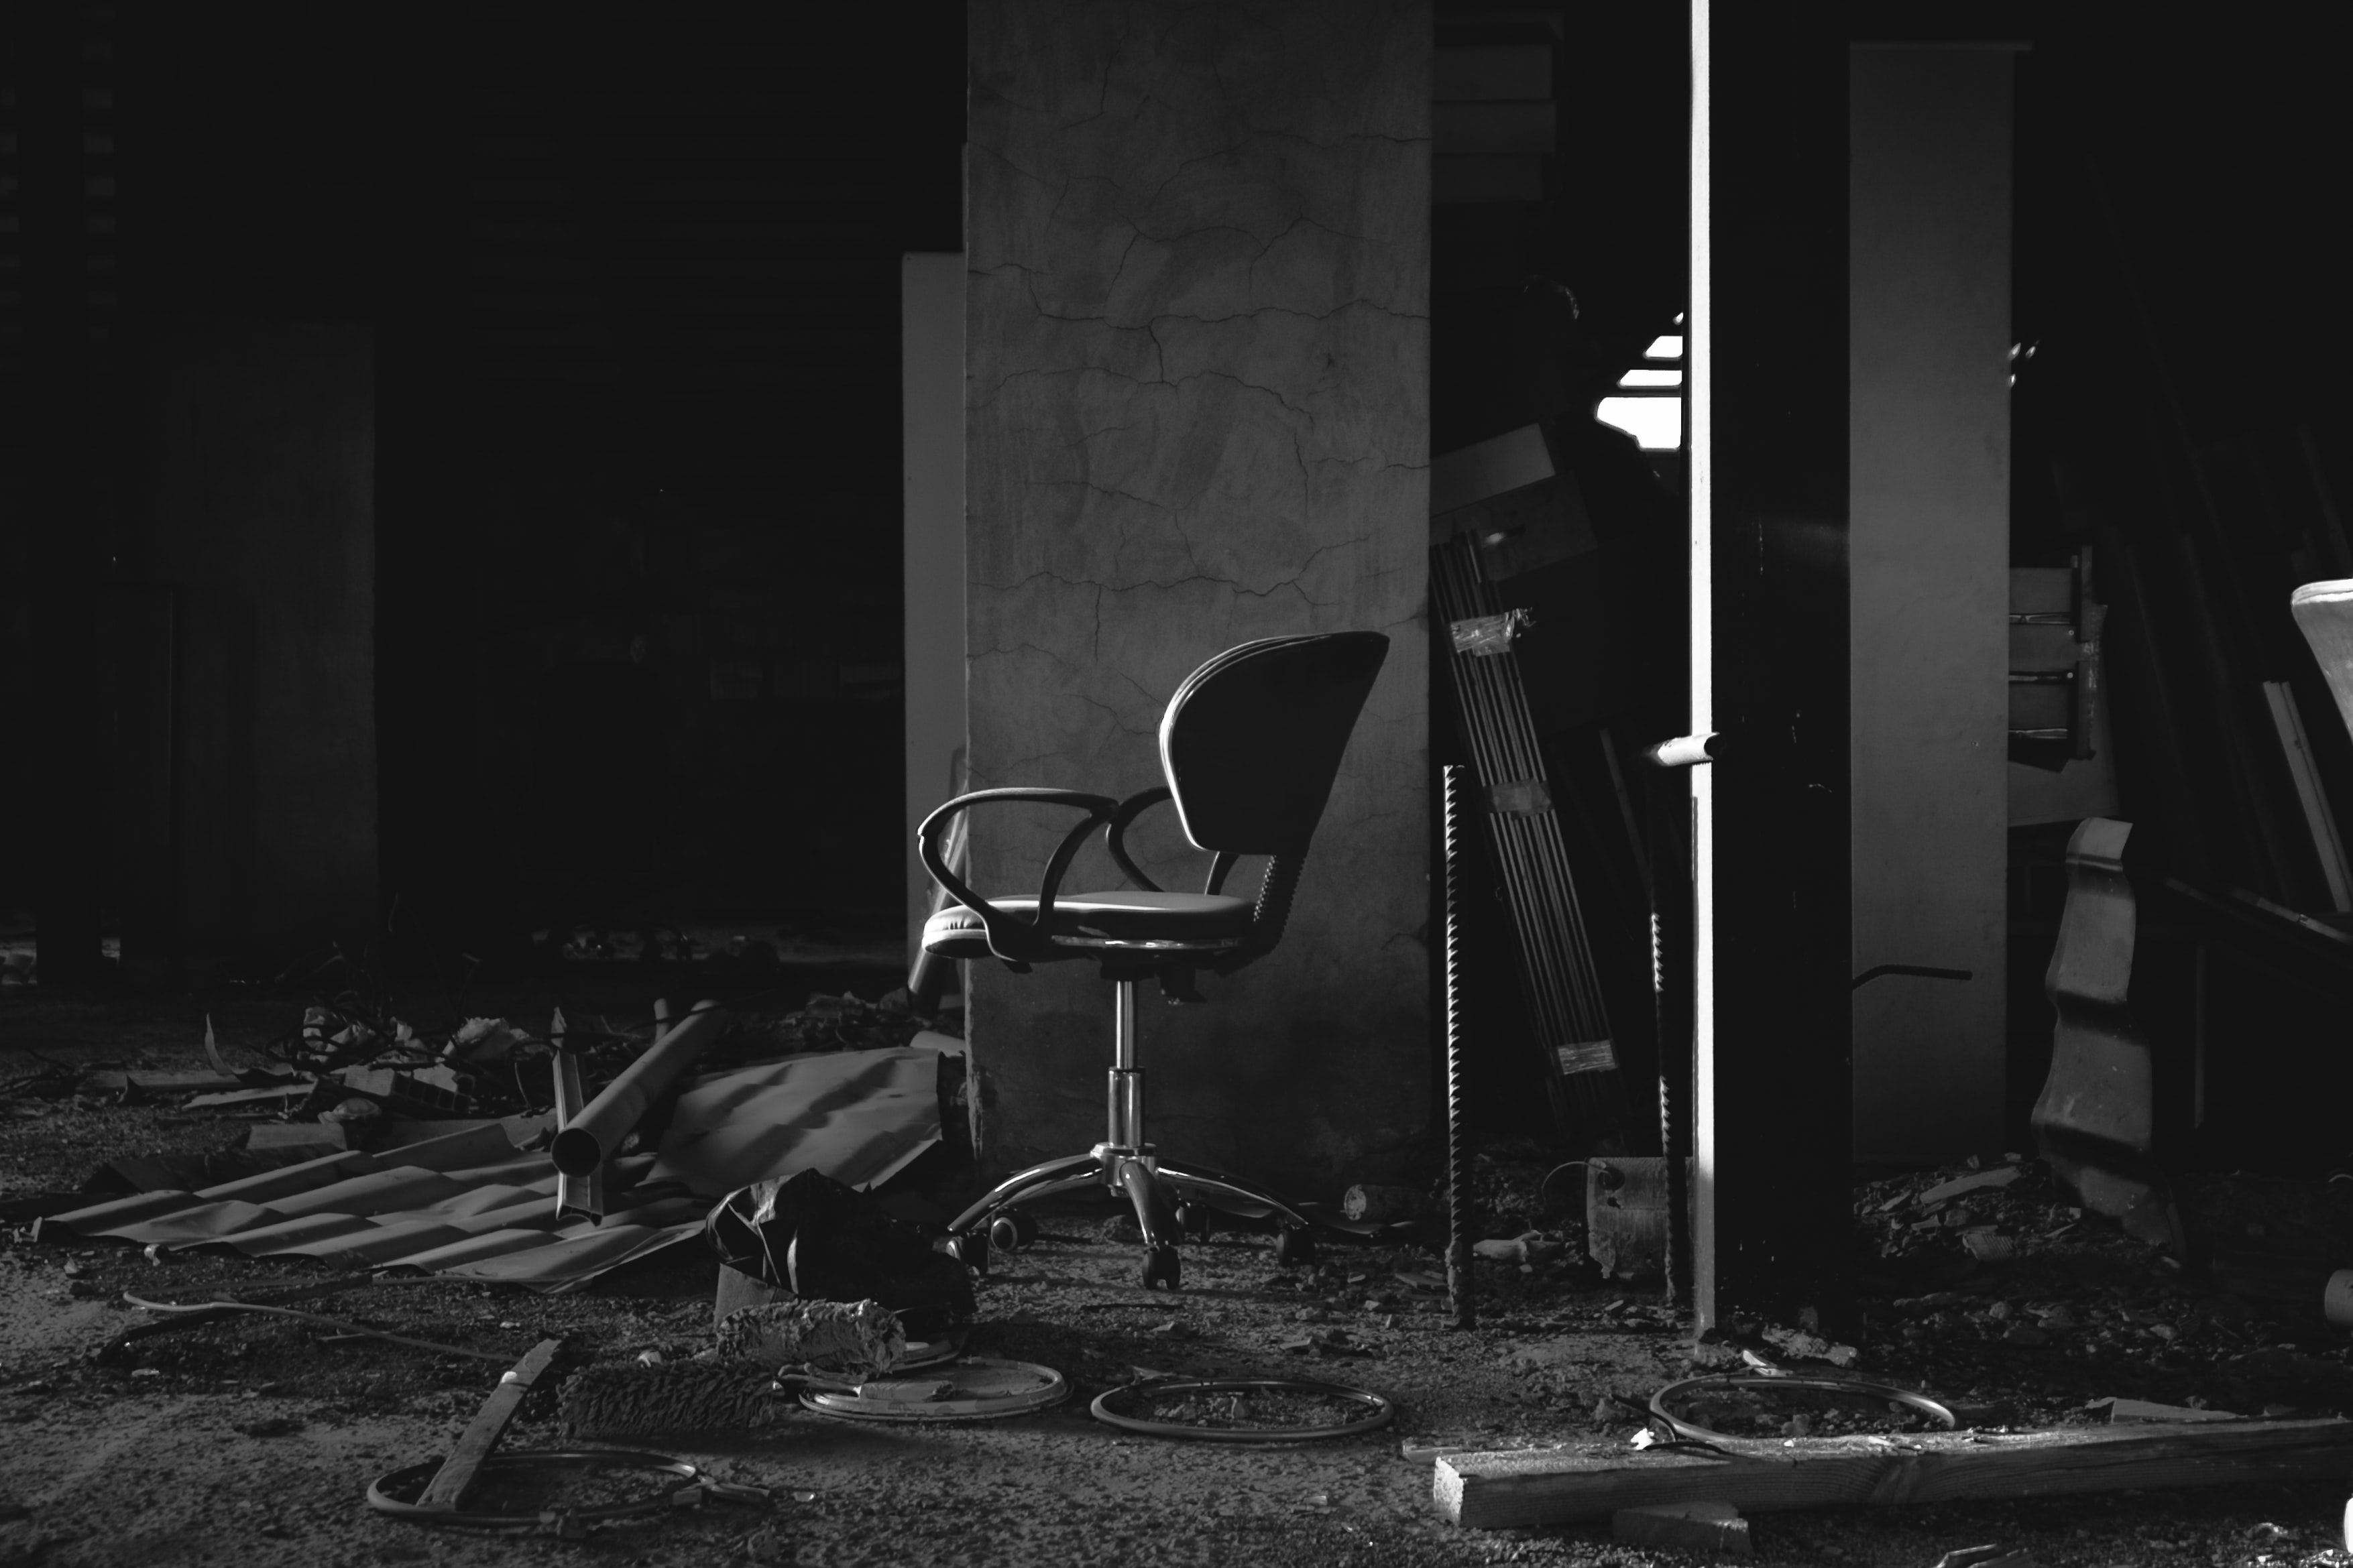 black and white photo of an office chair in a derelict and abandoned building